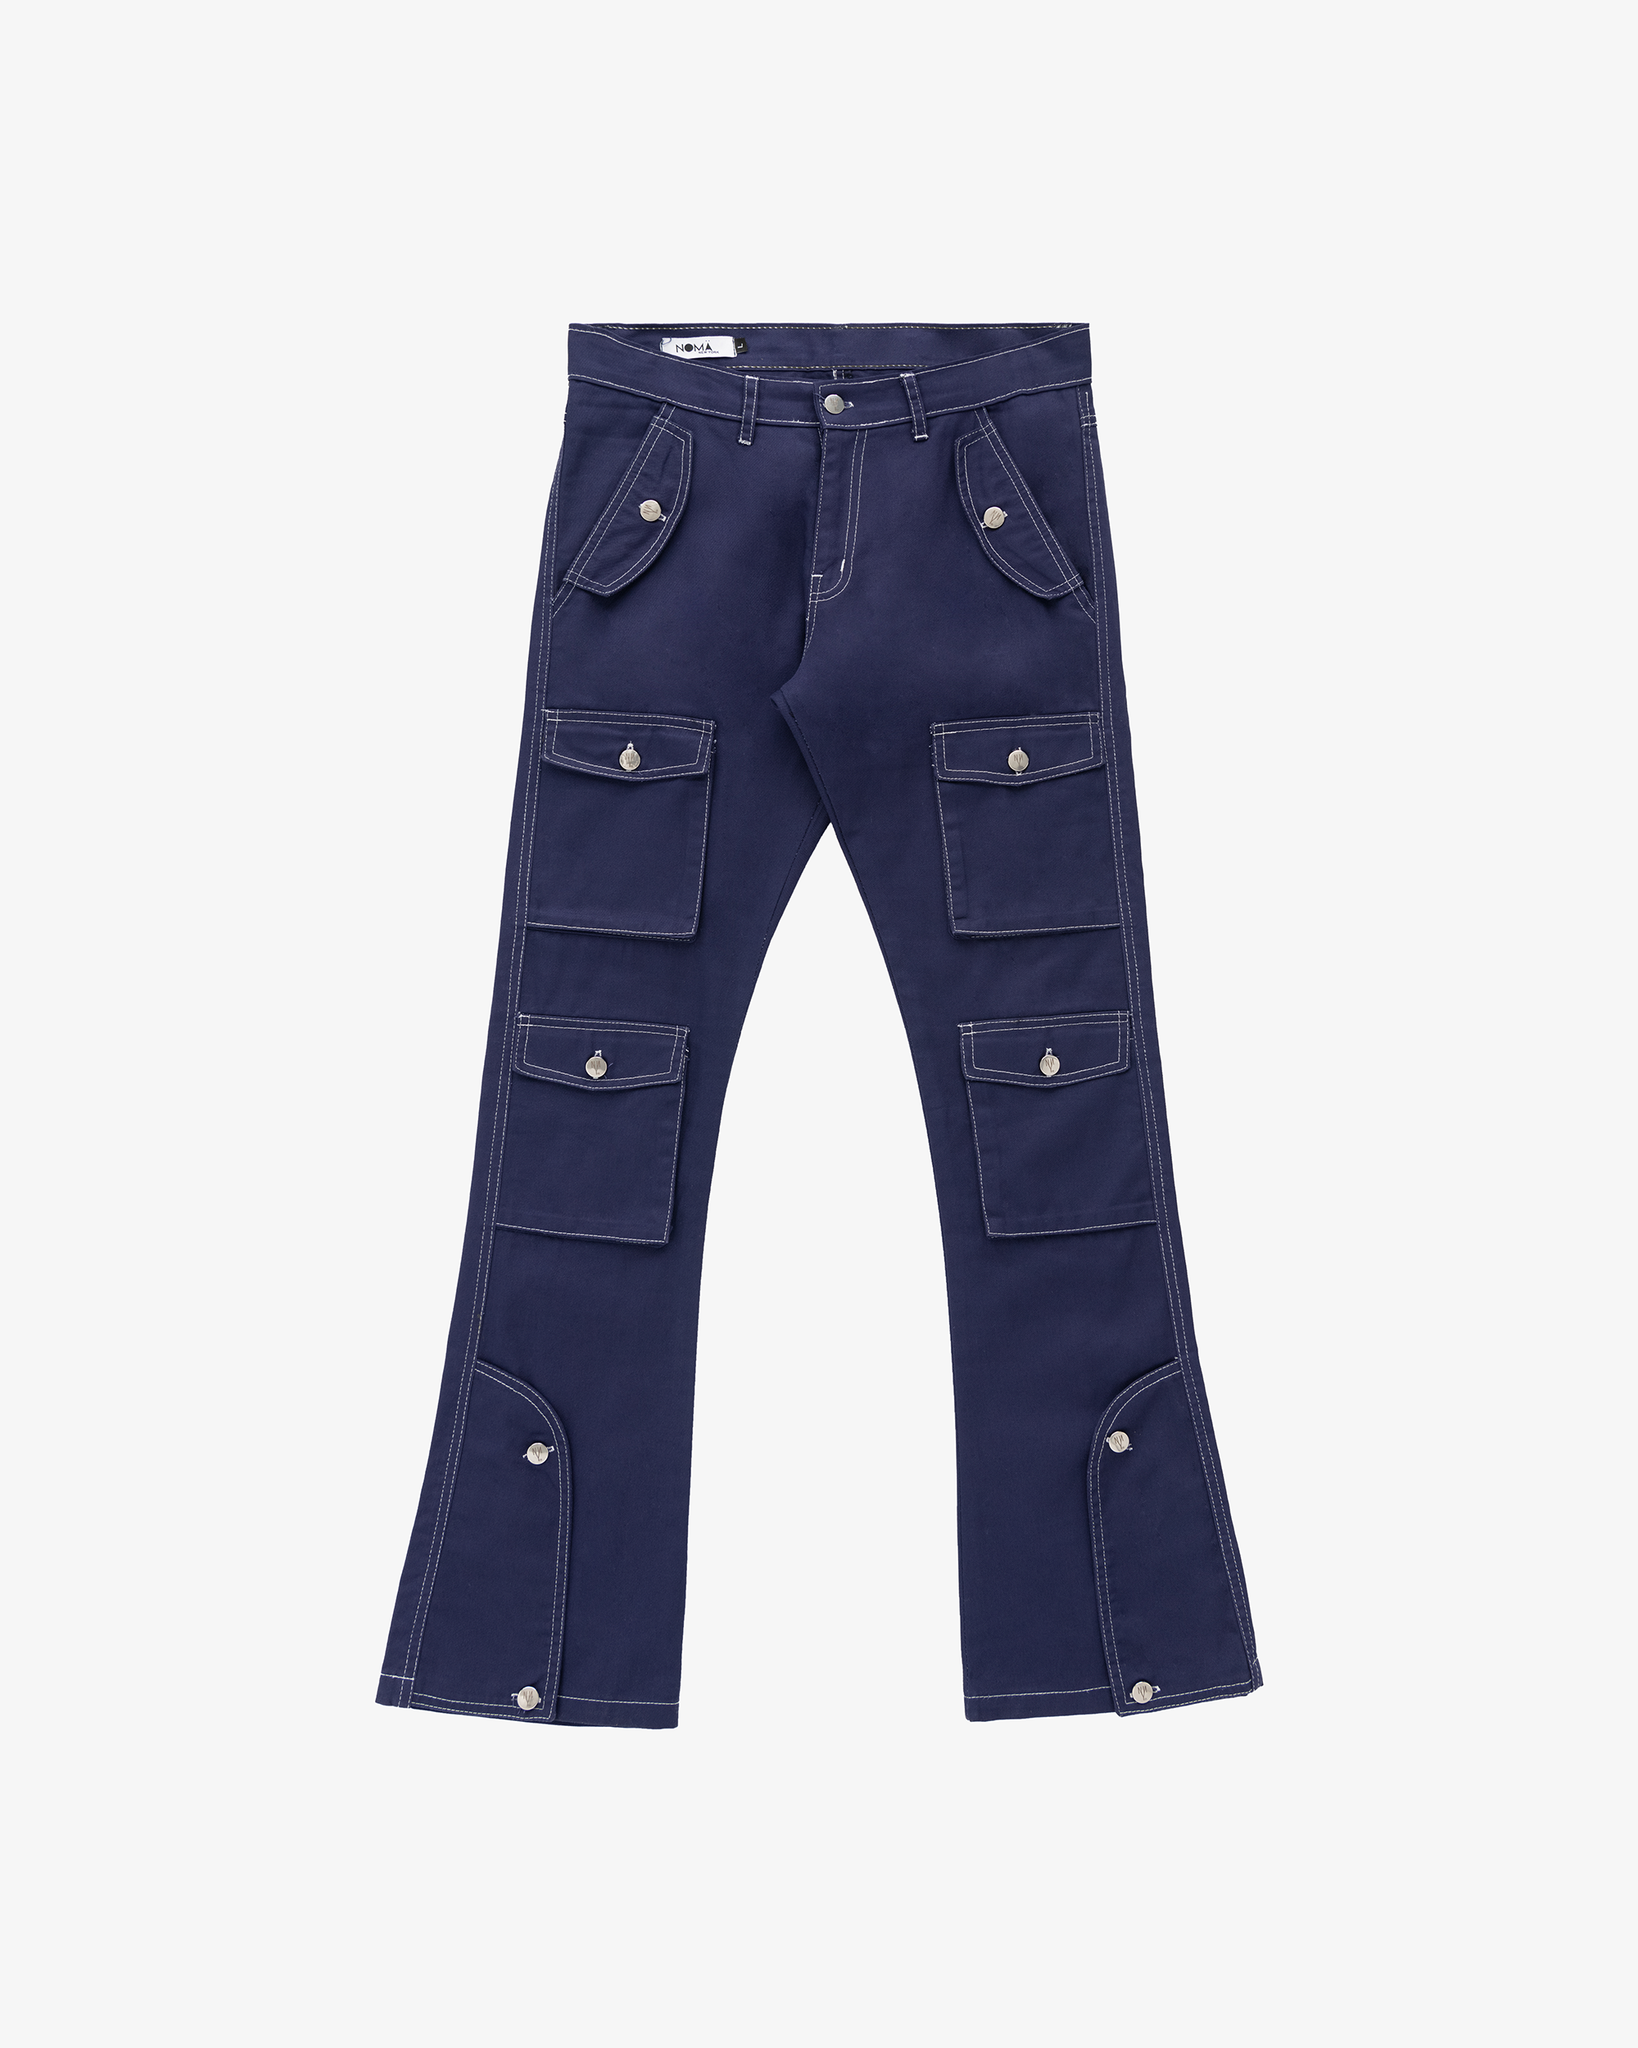 Anchors Article.009 Twill Field Pant